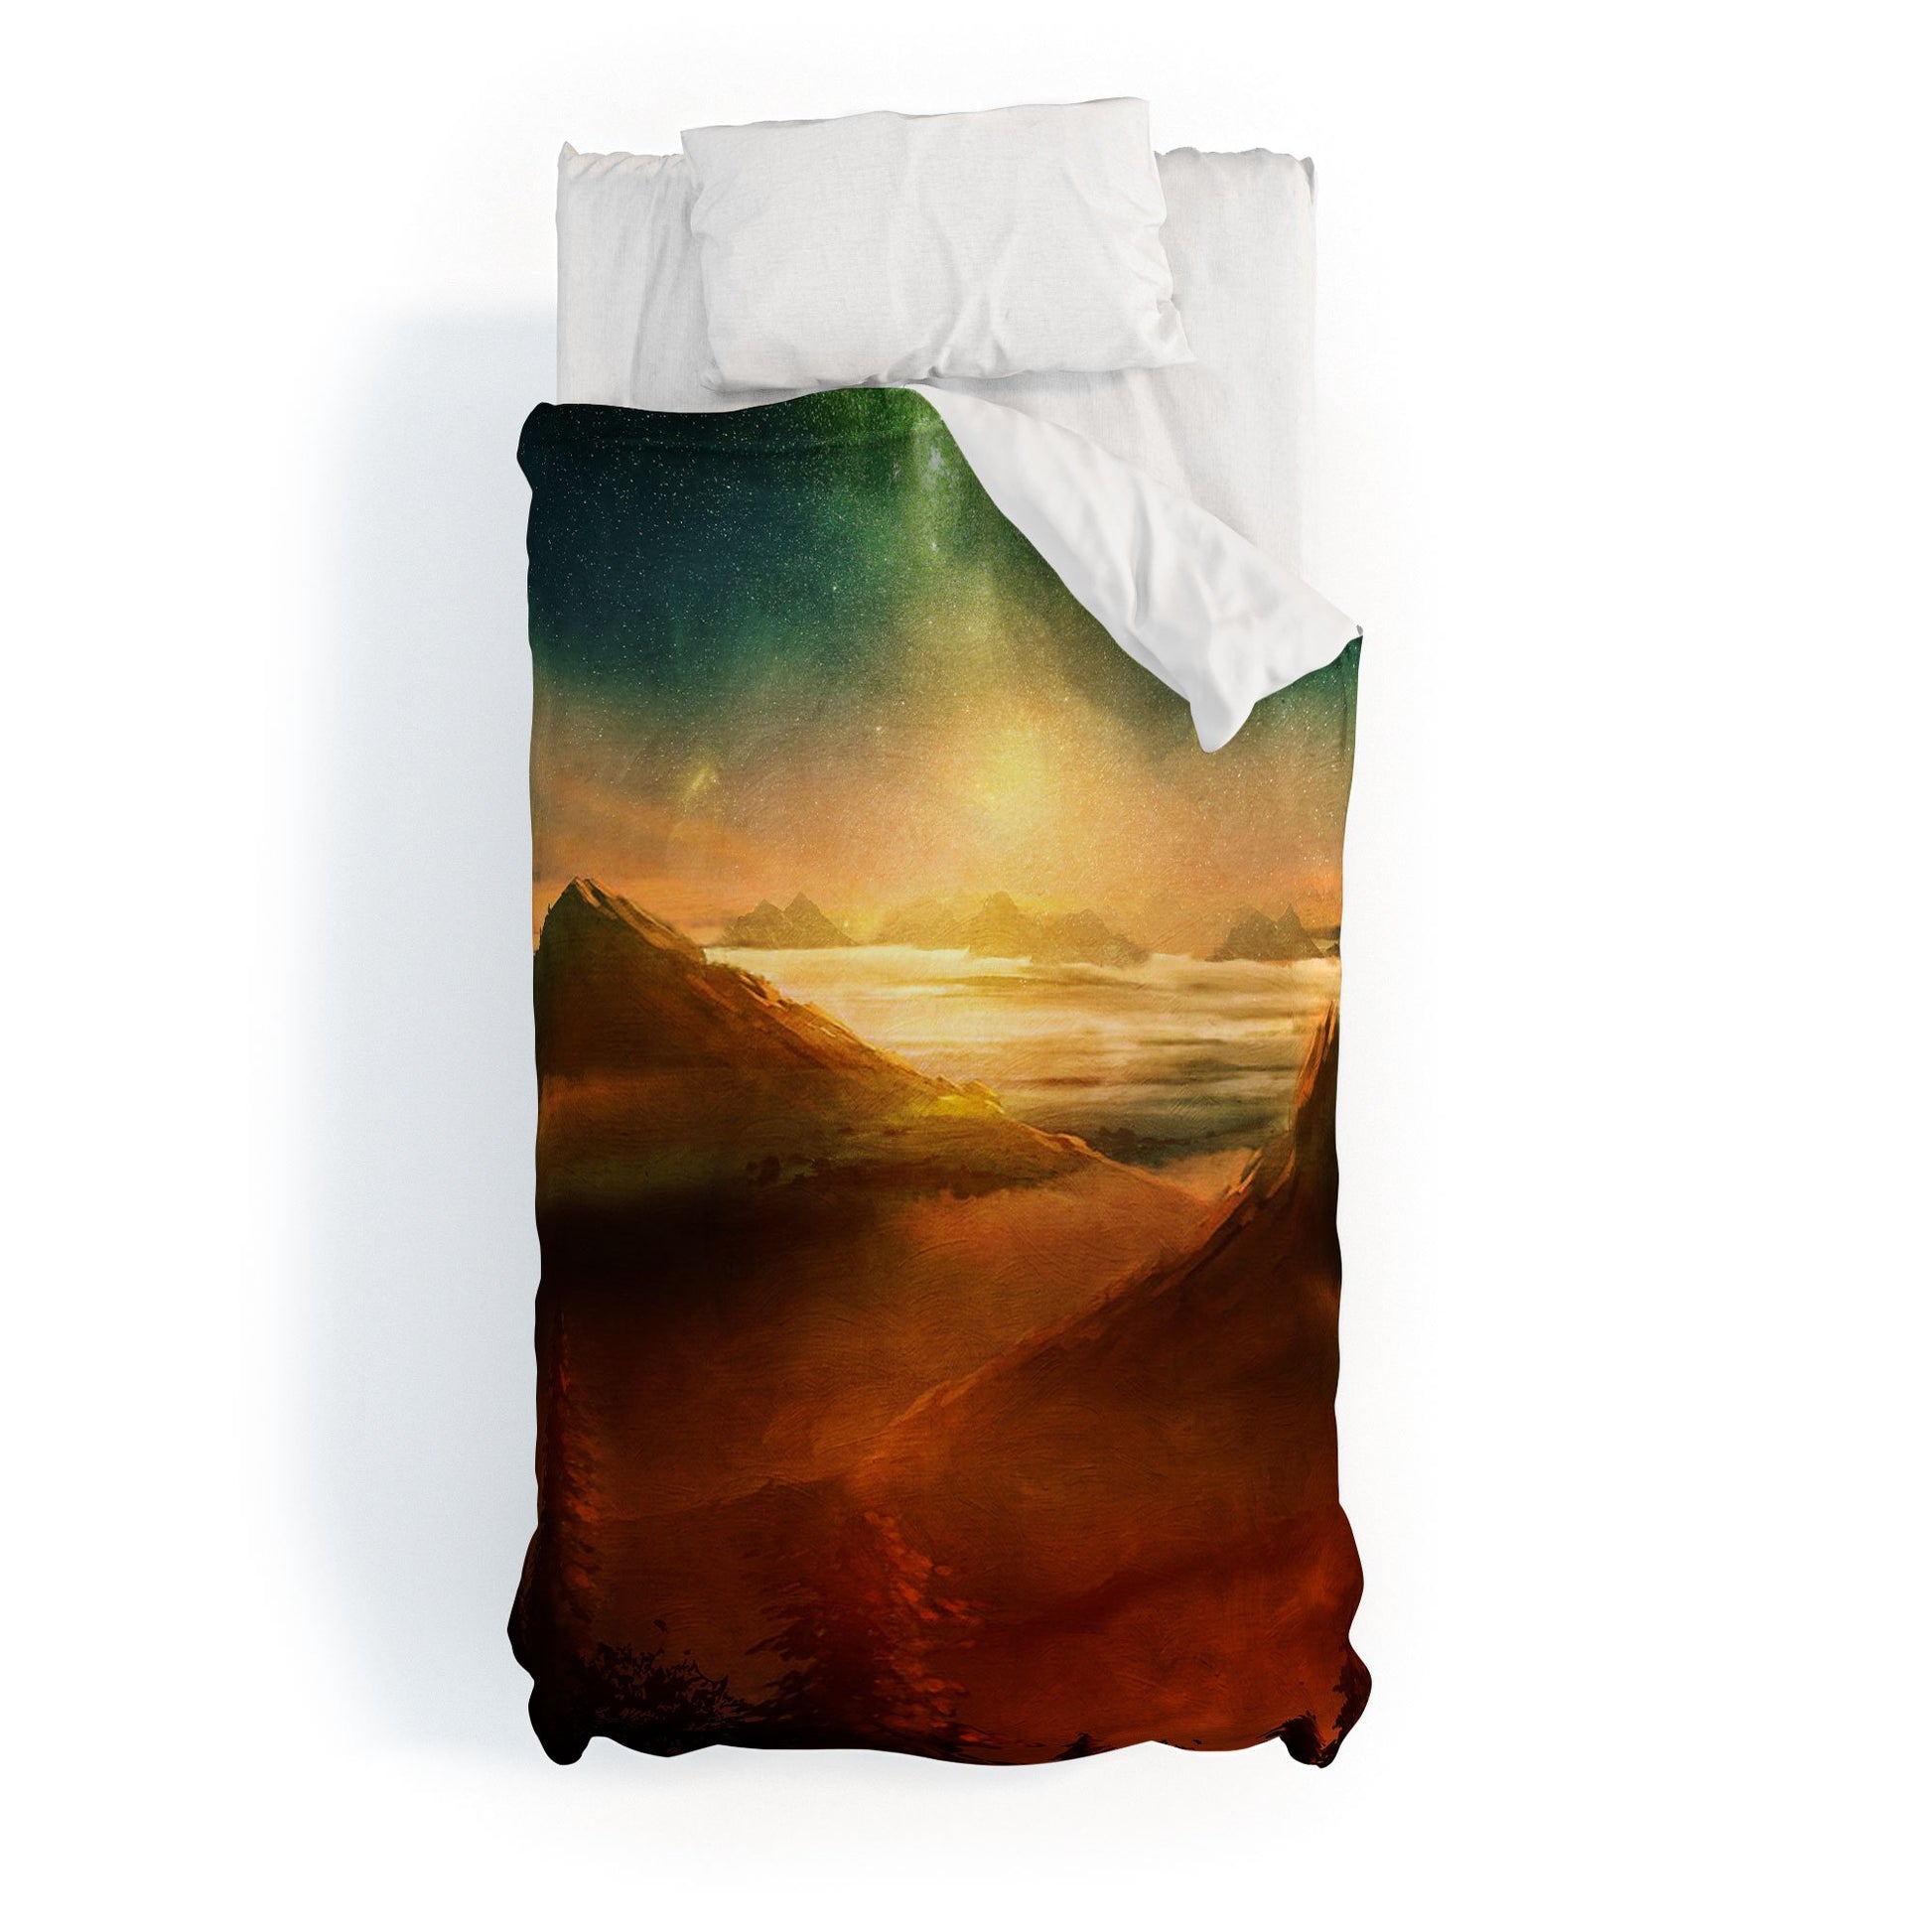 Into The Trees Duvet Cover - aztecprint, bedding, beddinng, bedspread, blanket, comforter, cover, desert, duvet, duvet cover, into the trees, mountain, mountain desert, mountains, ranchhome, ridge mountain, southwestern, western, westernbedding -  - Baha Ranch Western Wear